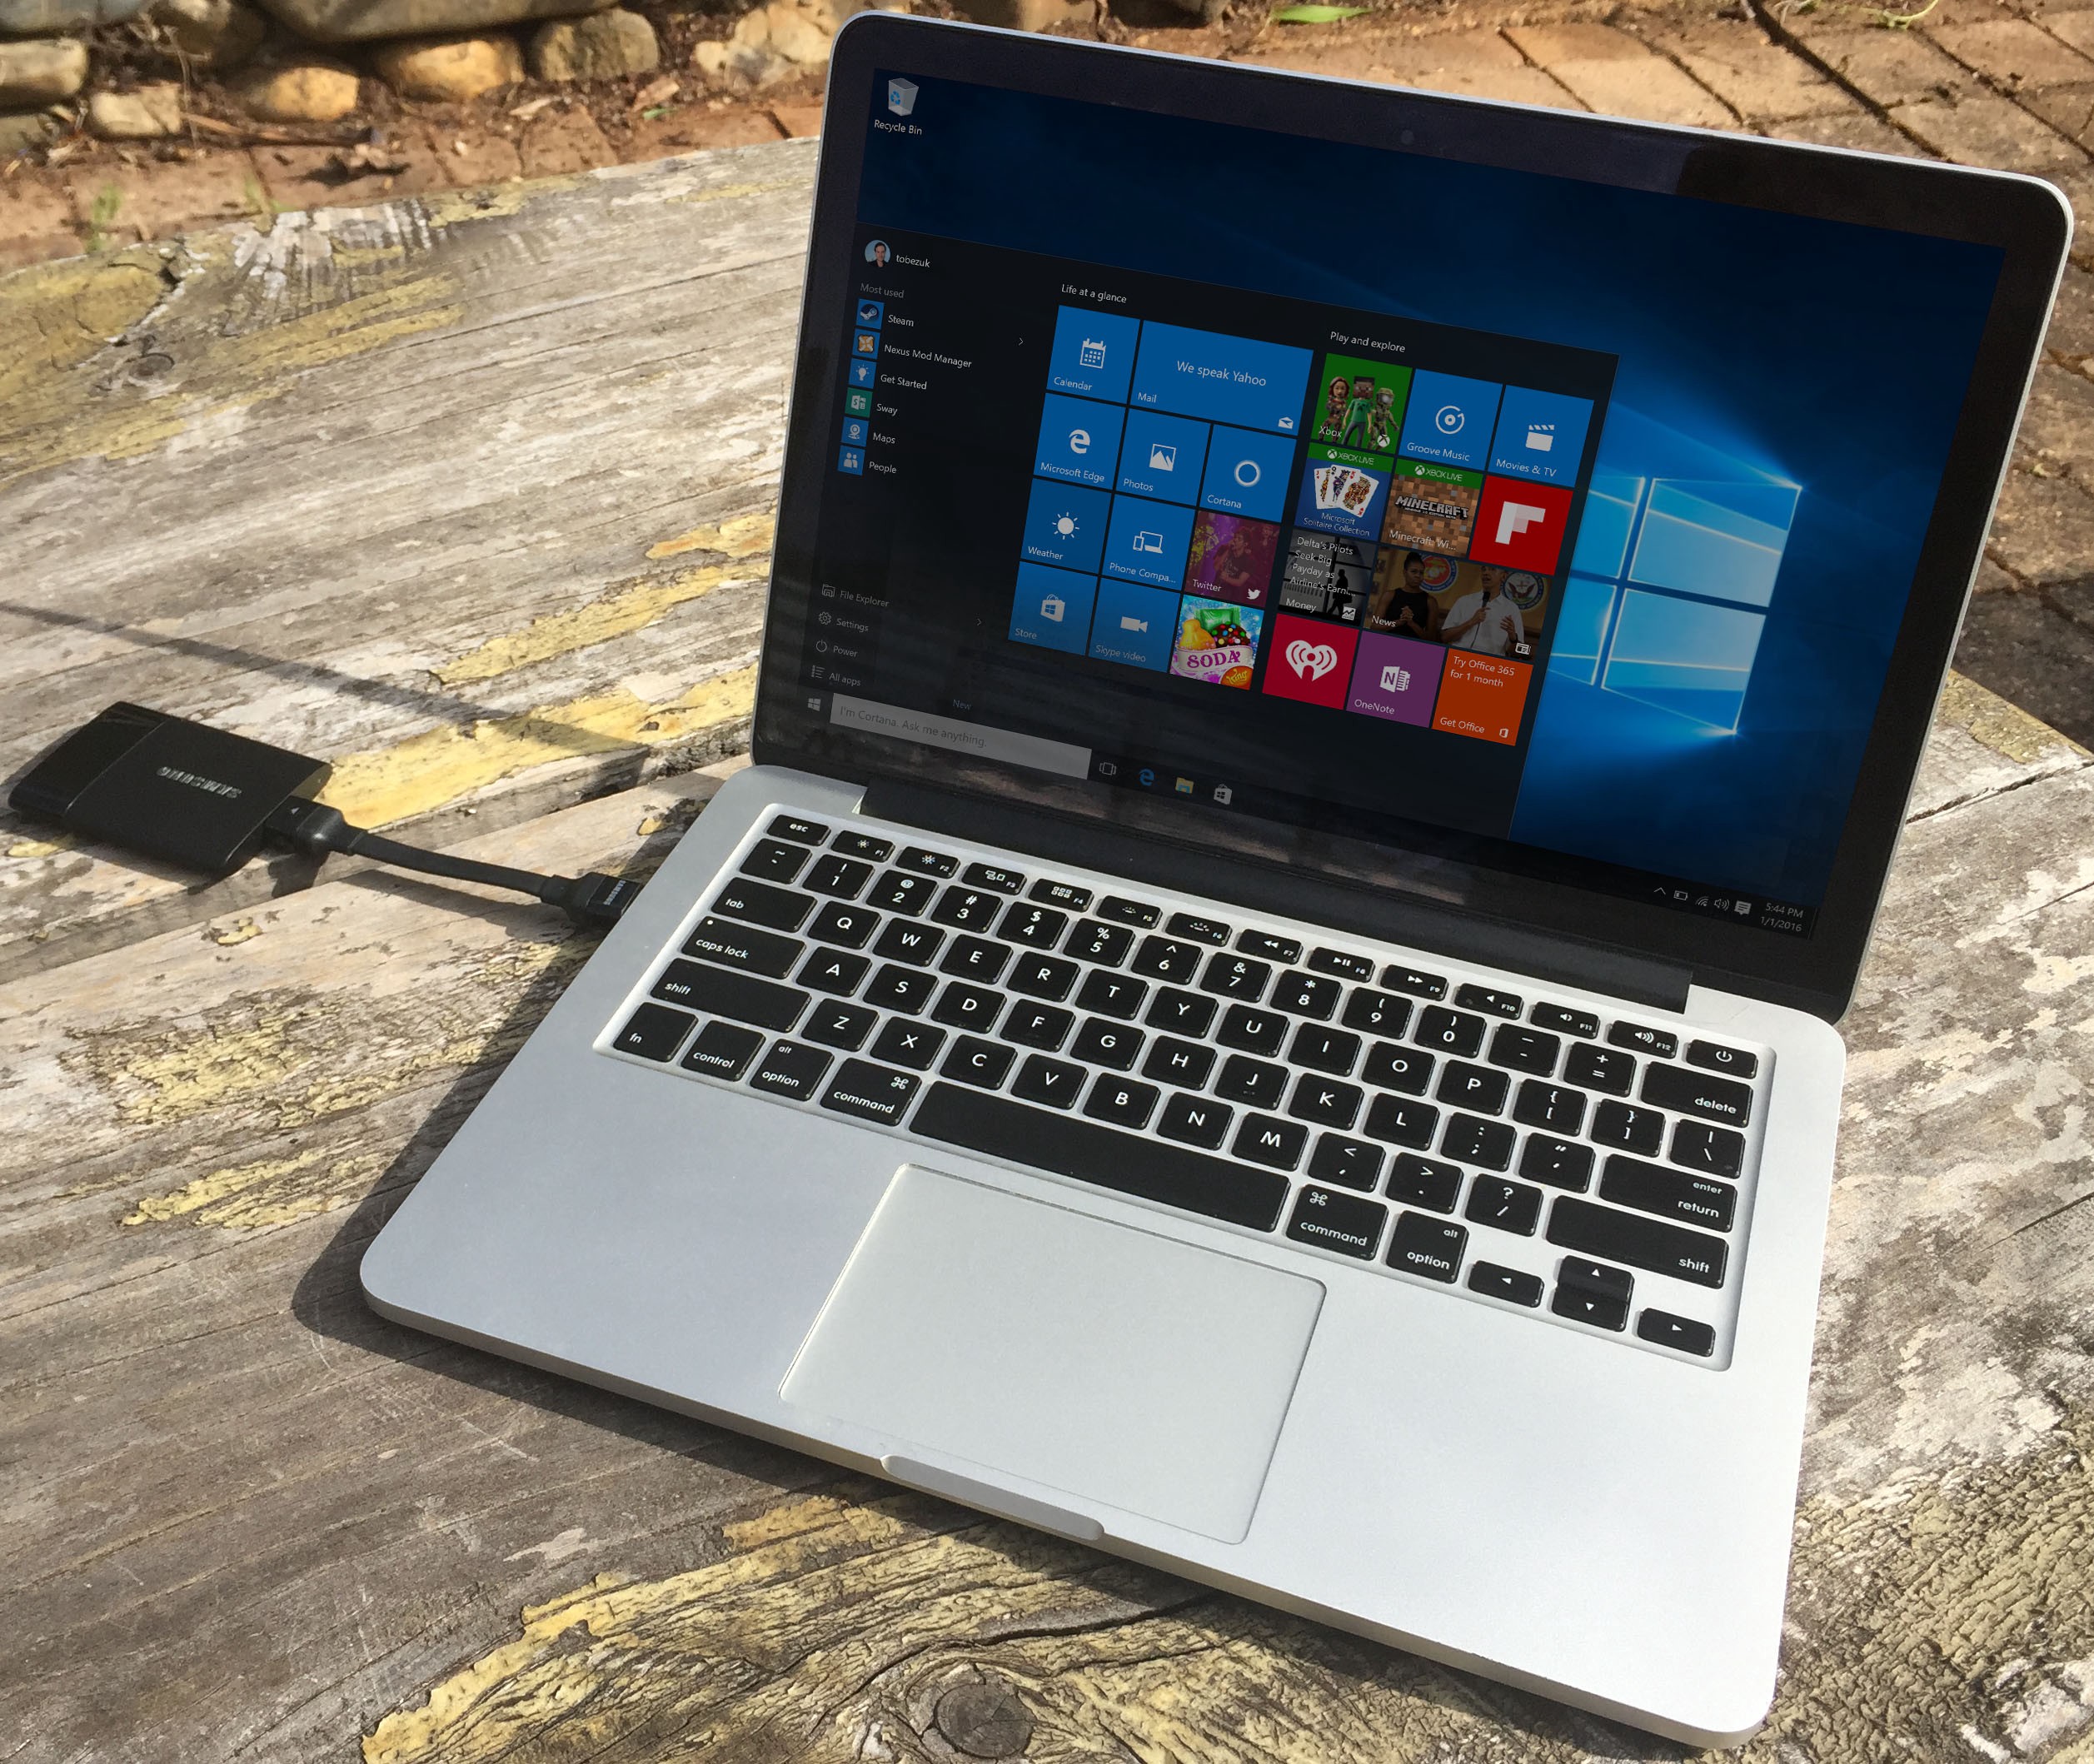 windows 10 boot camp for mac